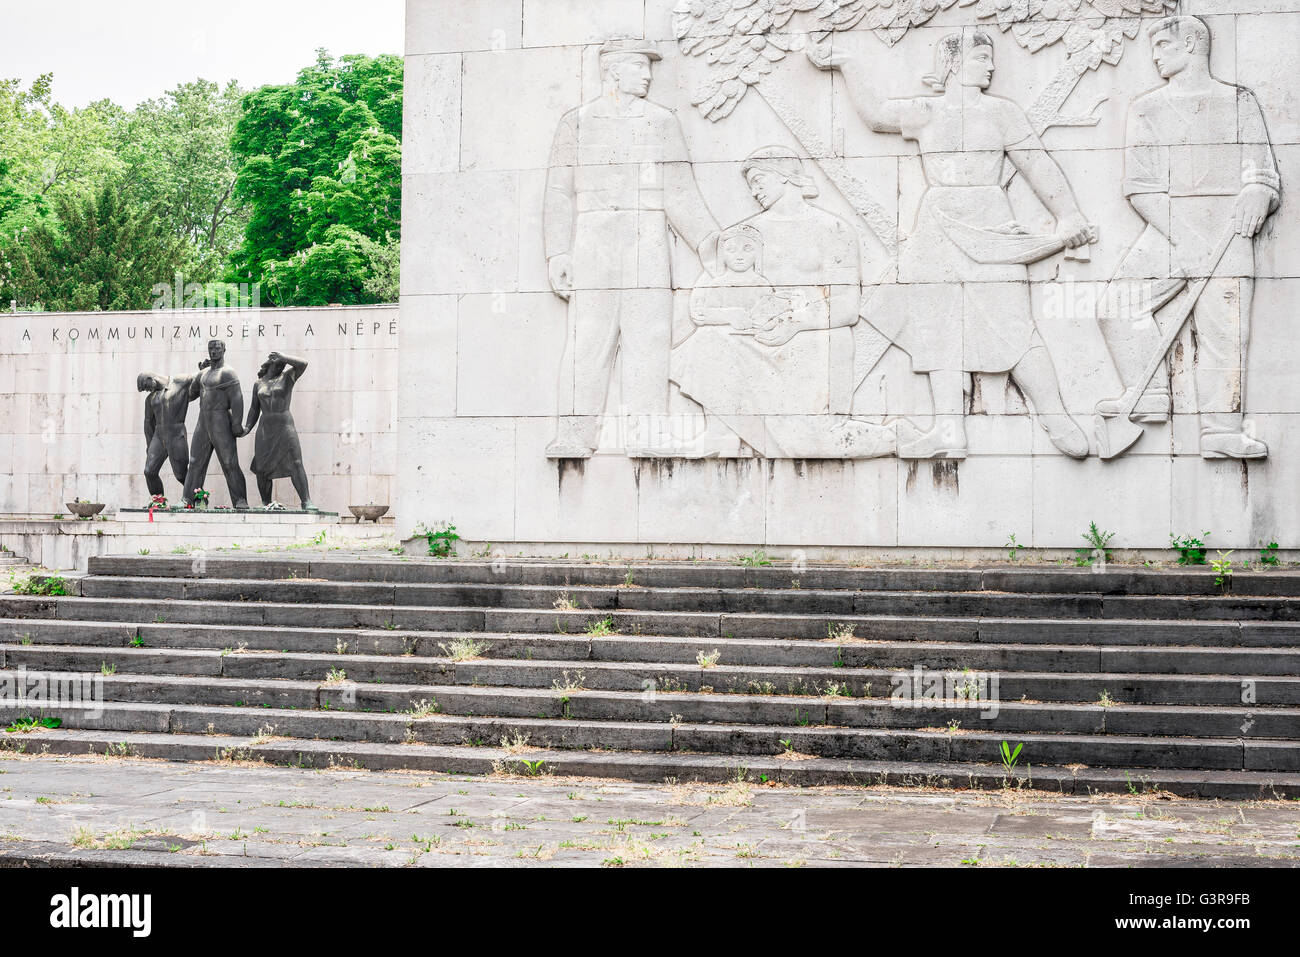 Communist Pantheon Of The Working Class Movement in the Kerepesi Cemetery in the Jozsefvaros area of Budapest, Europe. Stock Photo